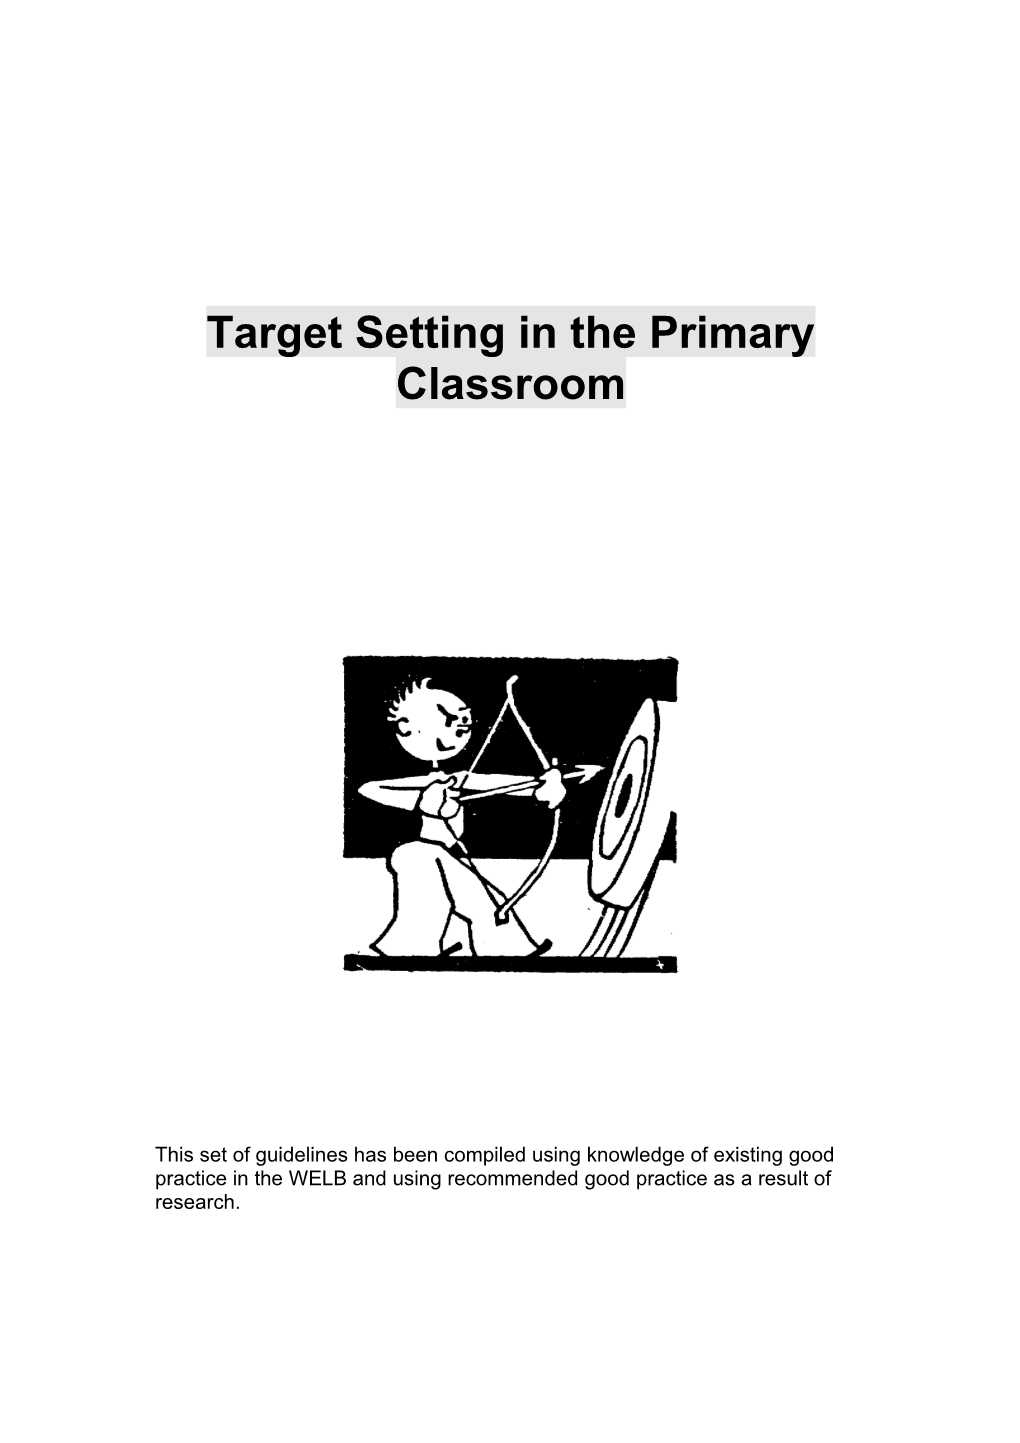 Target Setting in the Primary Classroom